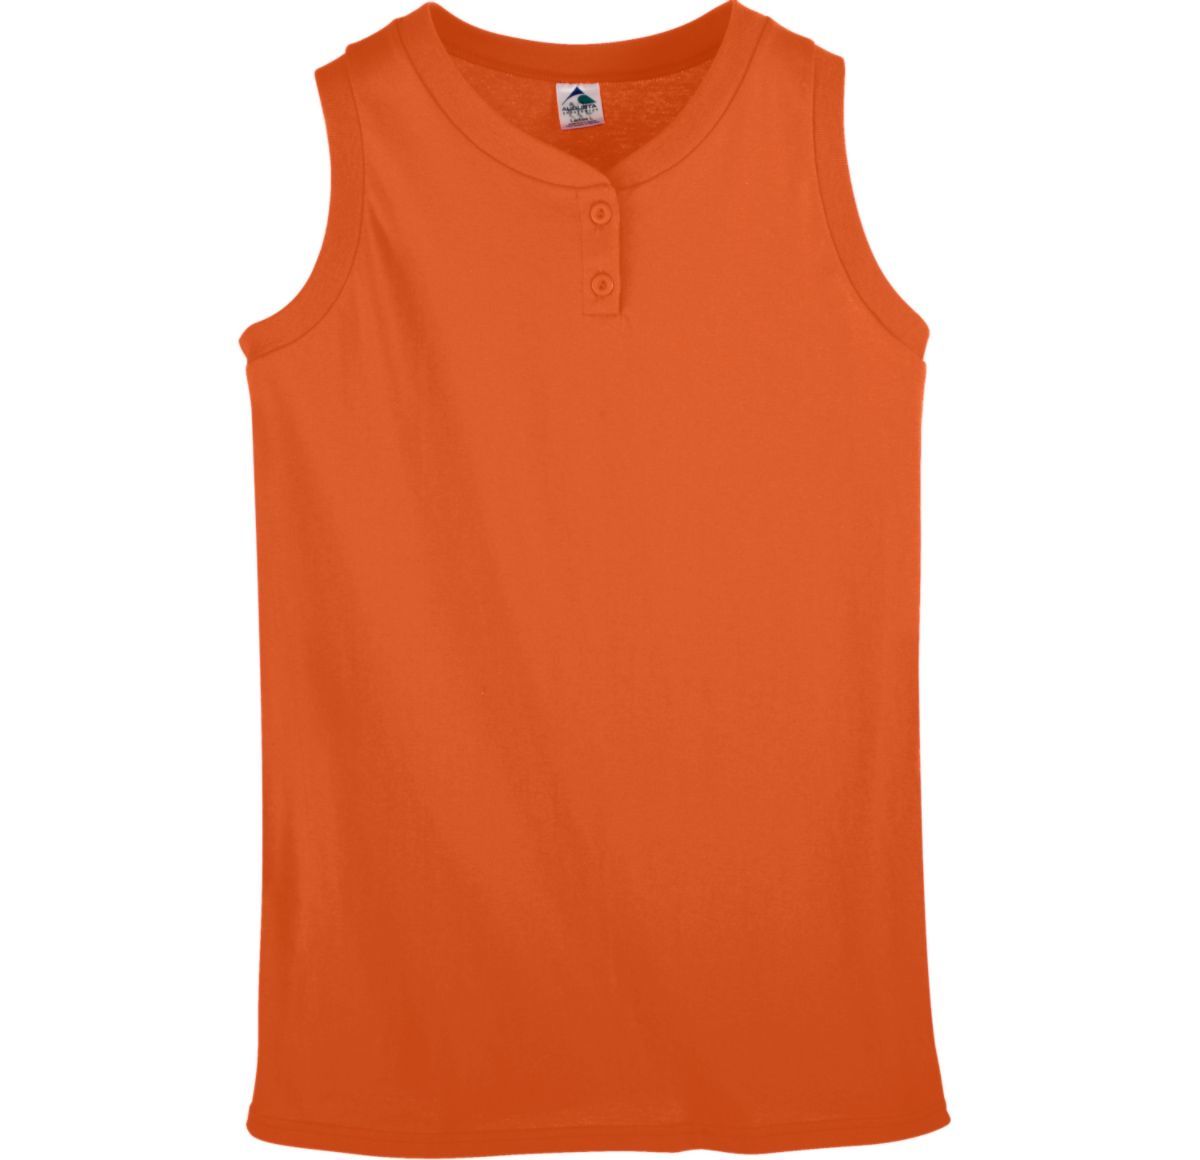 Augusta Sportswear Ladies Sleeveless Two Button Softball Jersey in Orange  -Part of the Ladies, Ladies-Jersey, Augusta-Products, Softball, Shirts product lines at KanaleyCreations.com